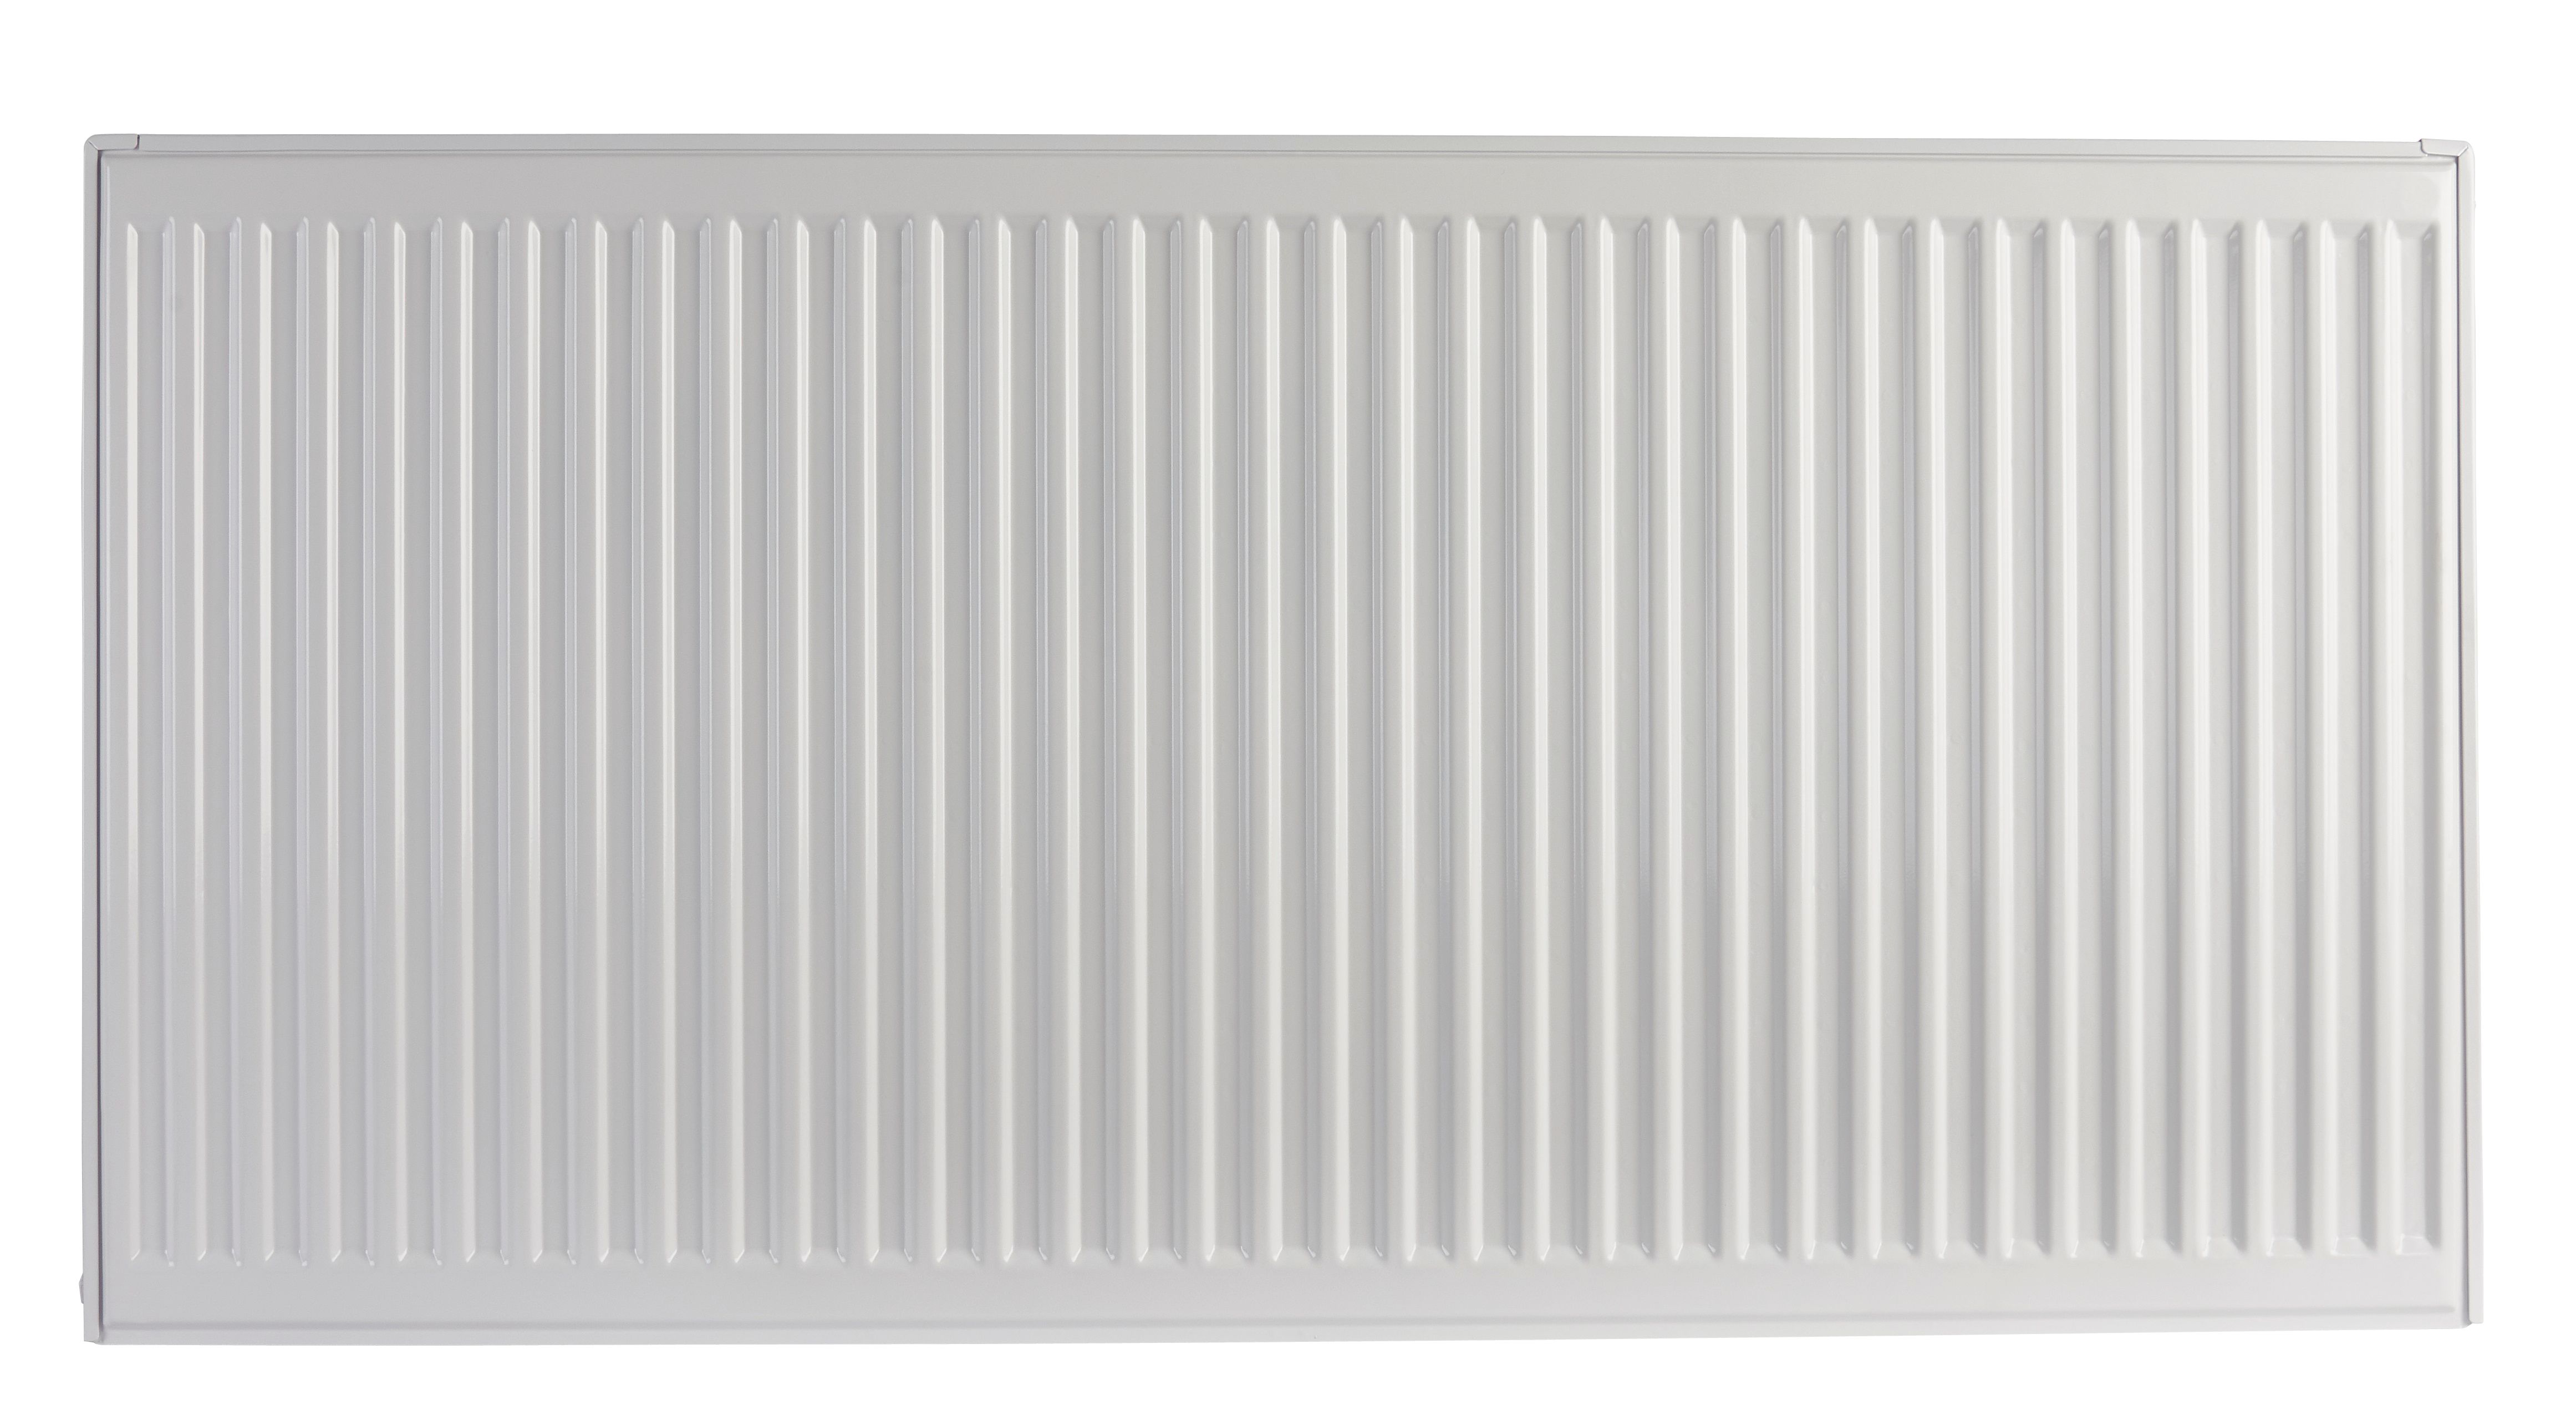 Image of Homeline by Stelrad 500 x 700mm Type 21 Double Panel Plus Single Convector Radiator